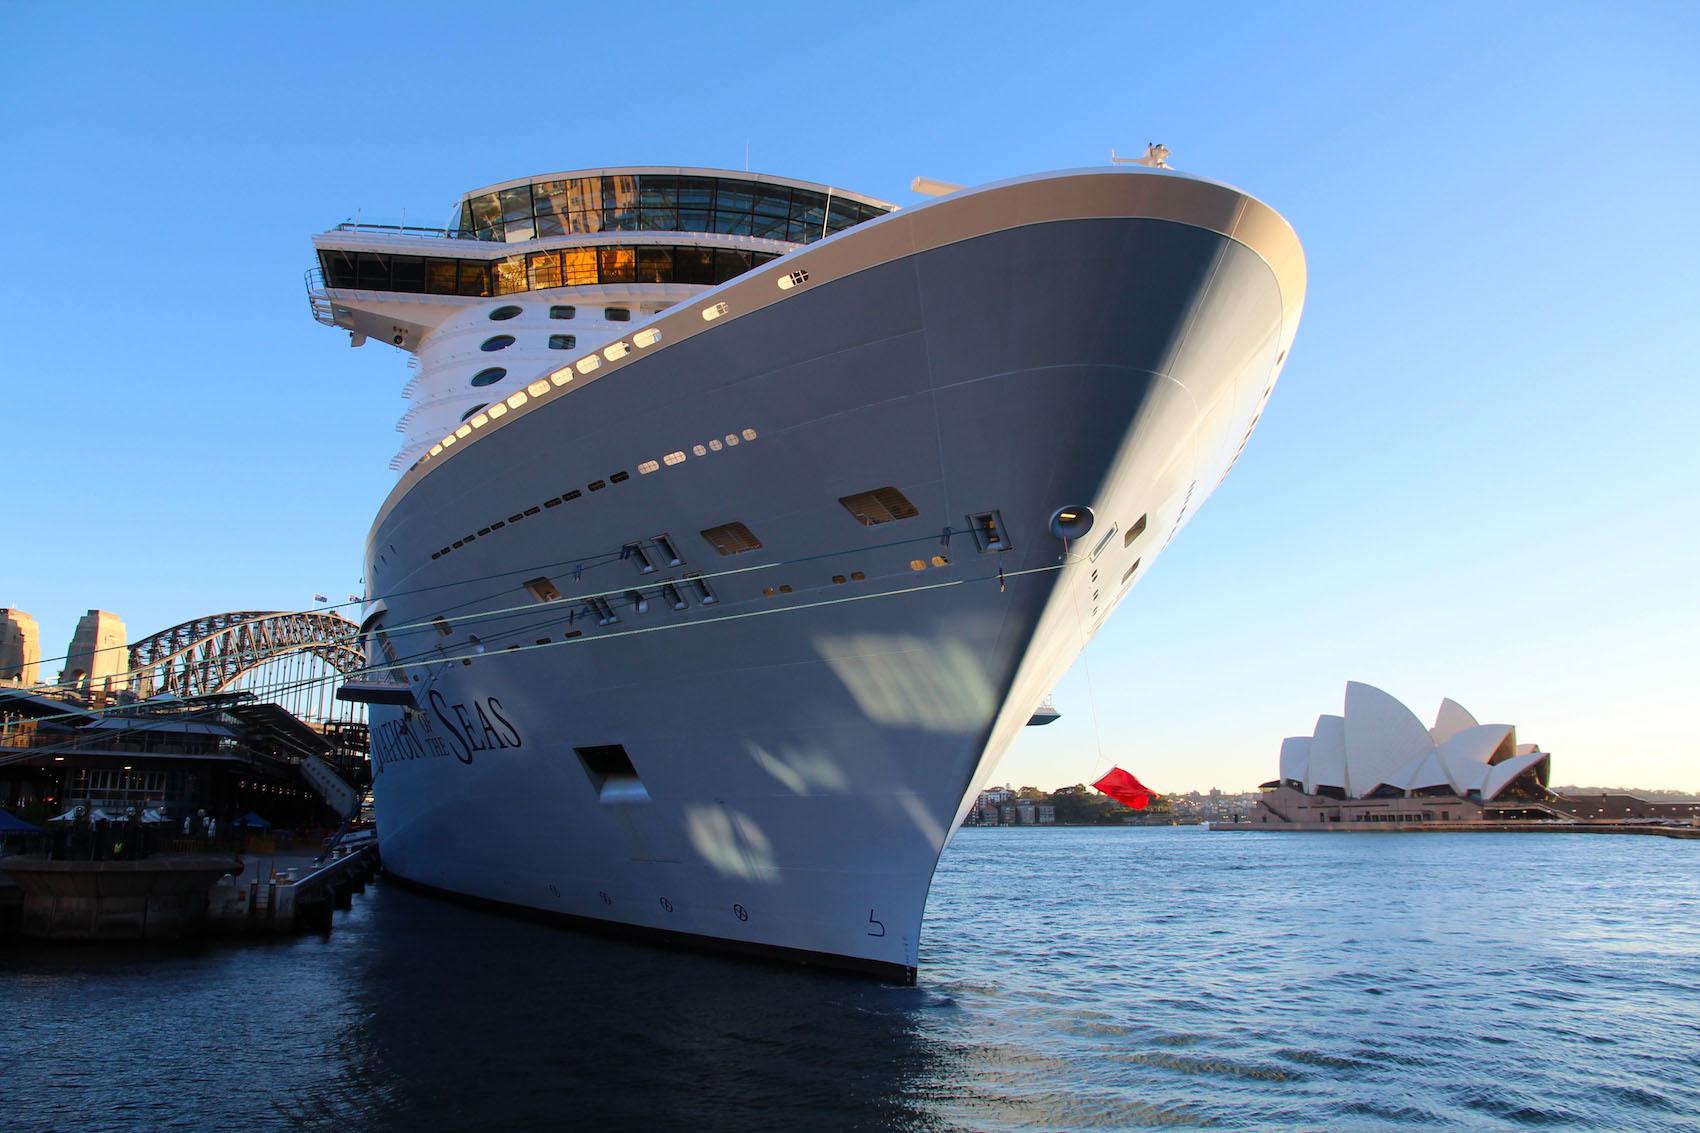 Ovation of the Seas bids farewell to Sydney after a successful maiden season